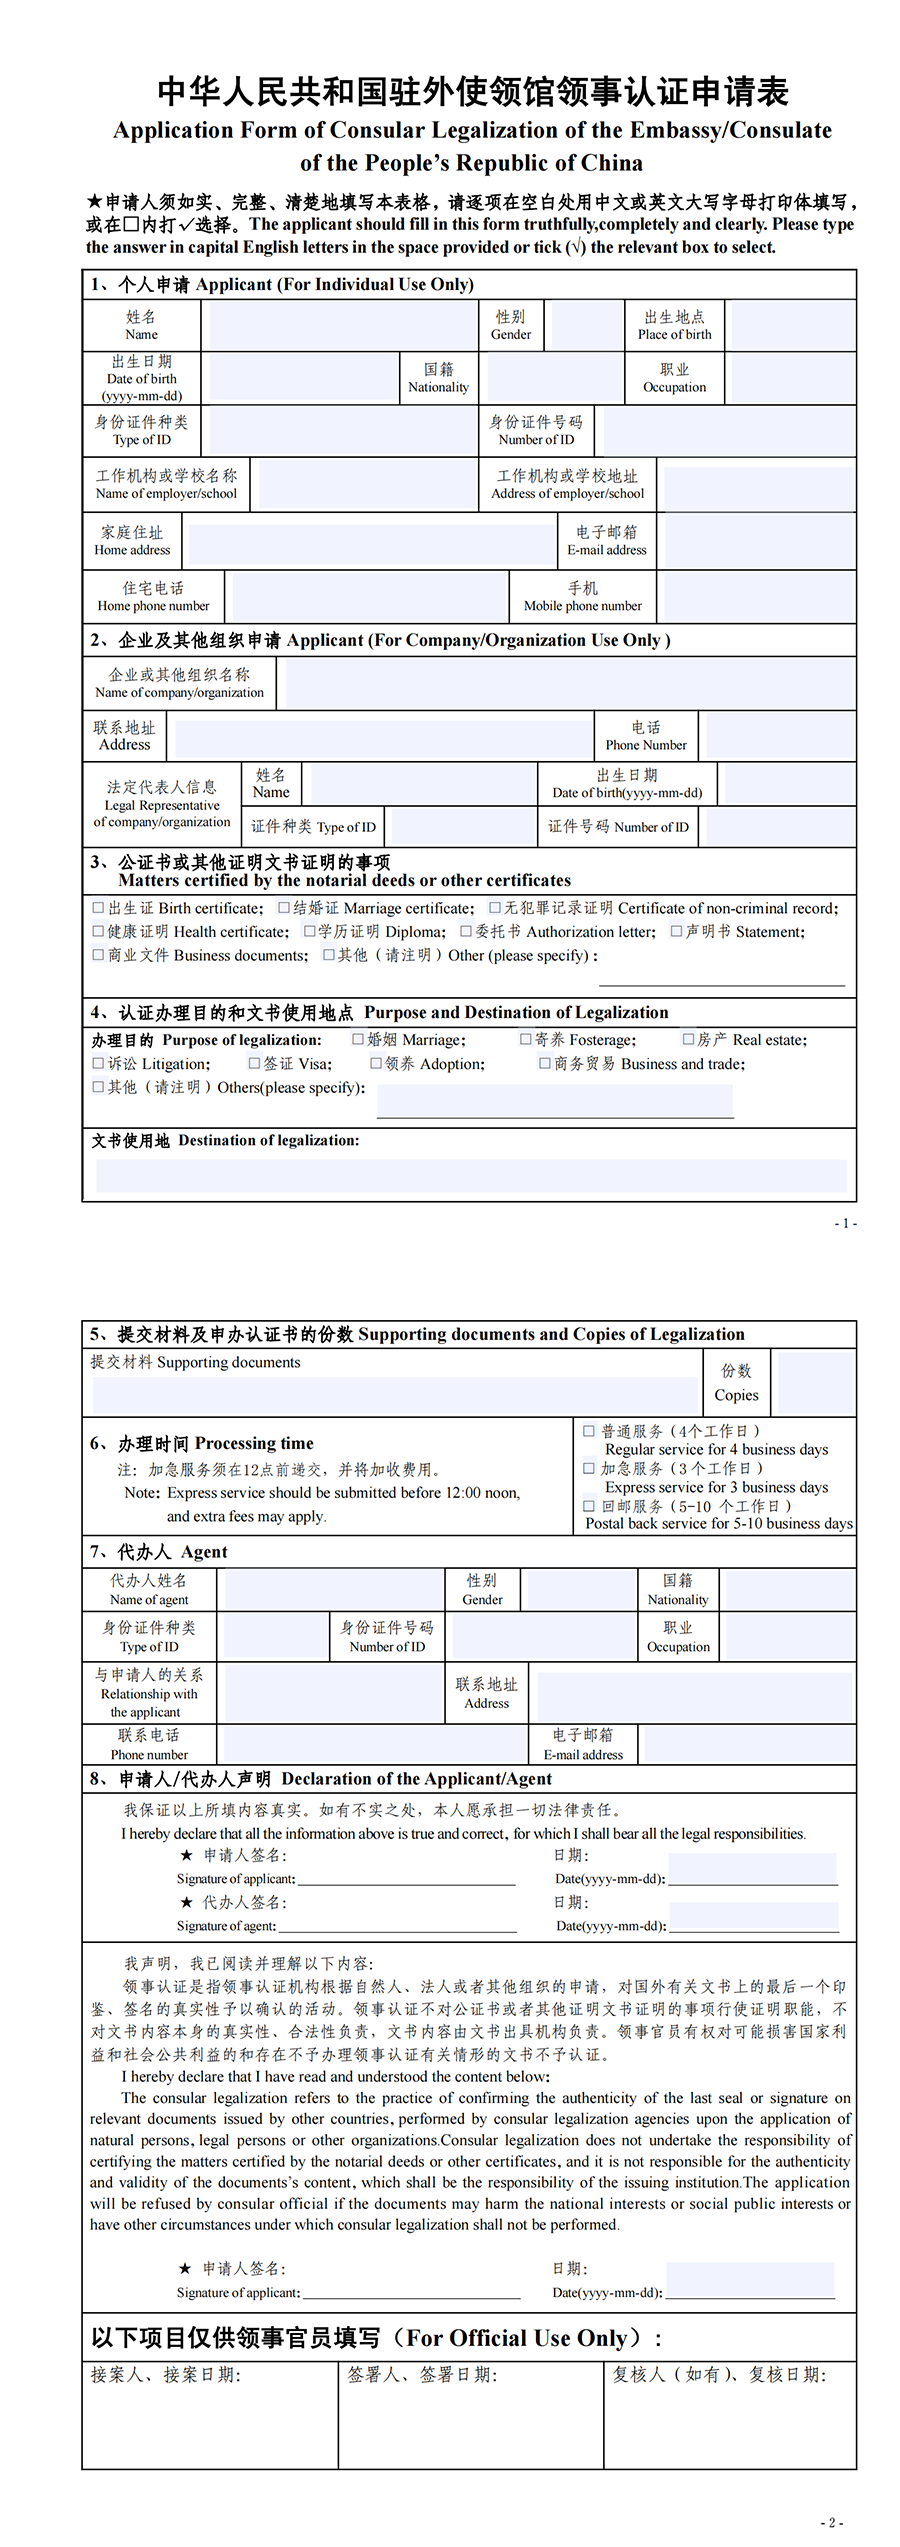 Application Form of Consular Legalization